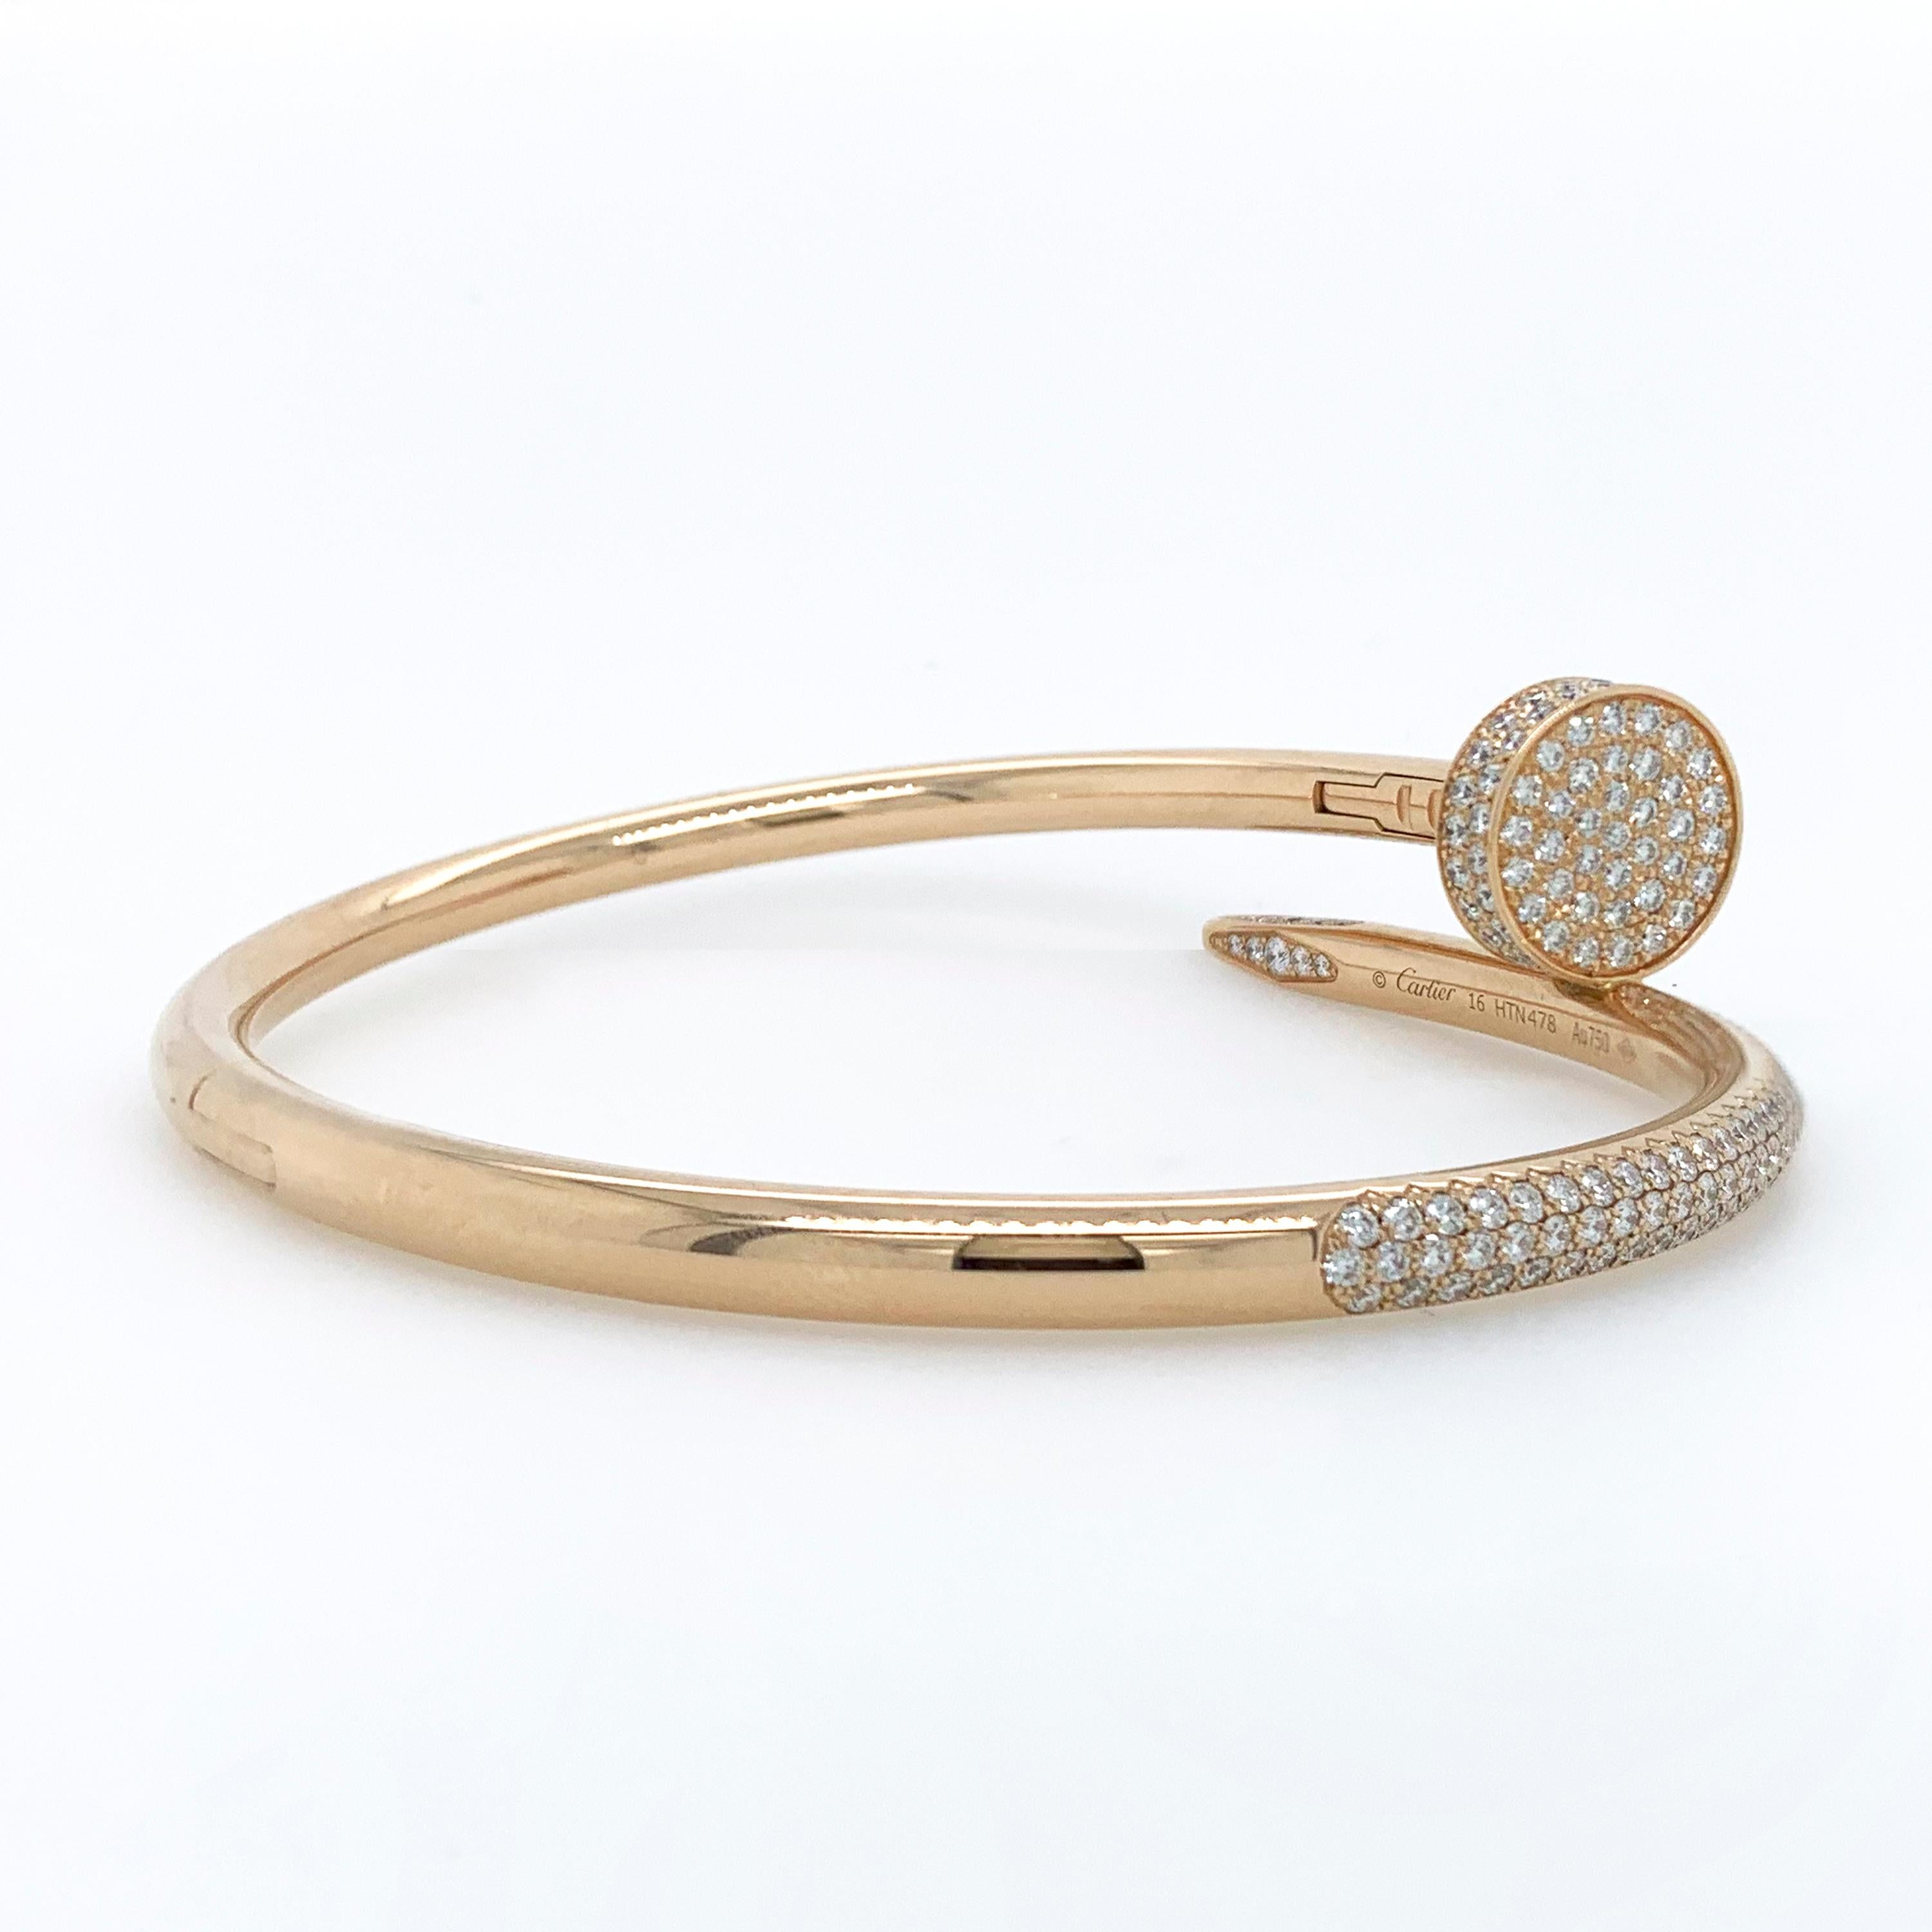 Cartier Juste Un Clou diamond nail bracelet in 18k rose gold, accompanied by Cartier box.

This bangle features 374 pave set round brilliant cut diamonds totaling approximately 2.26 carat with F-G color and VS+ clarity.  

Size 16
Numbered and